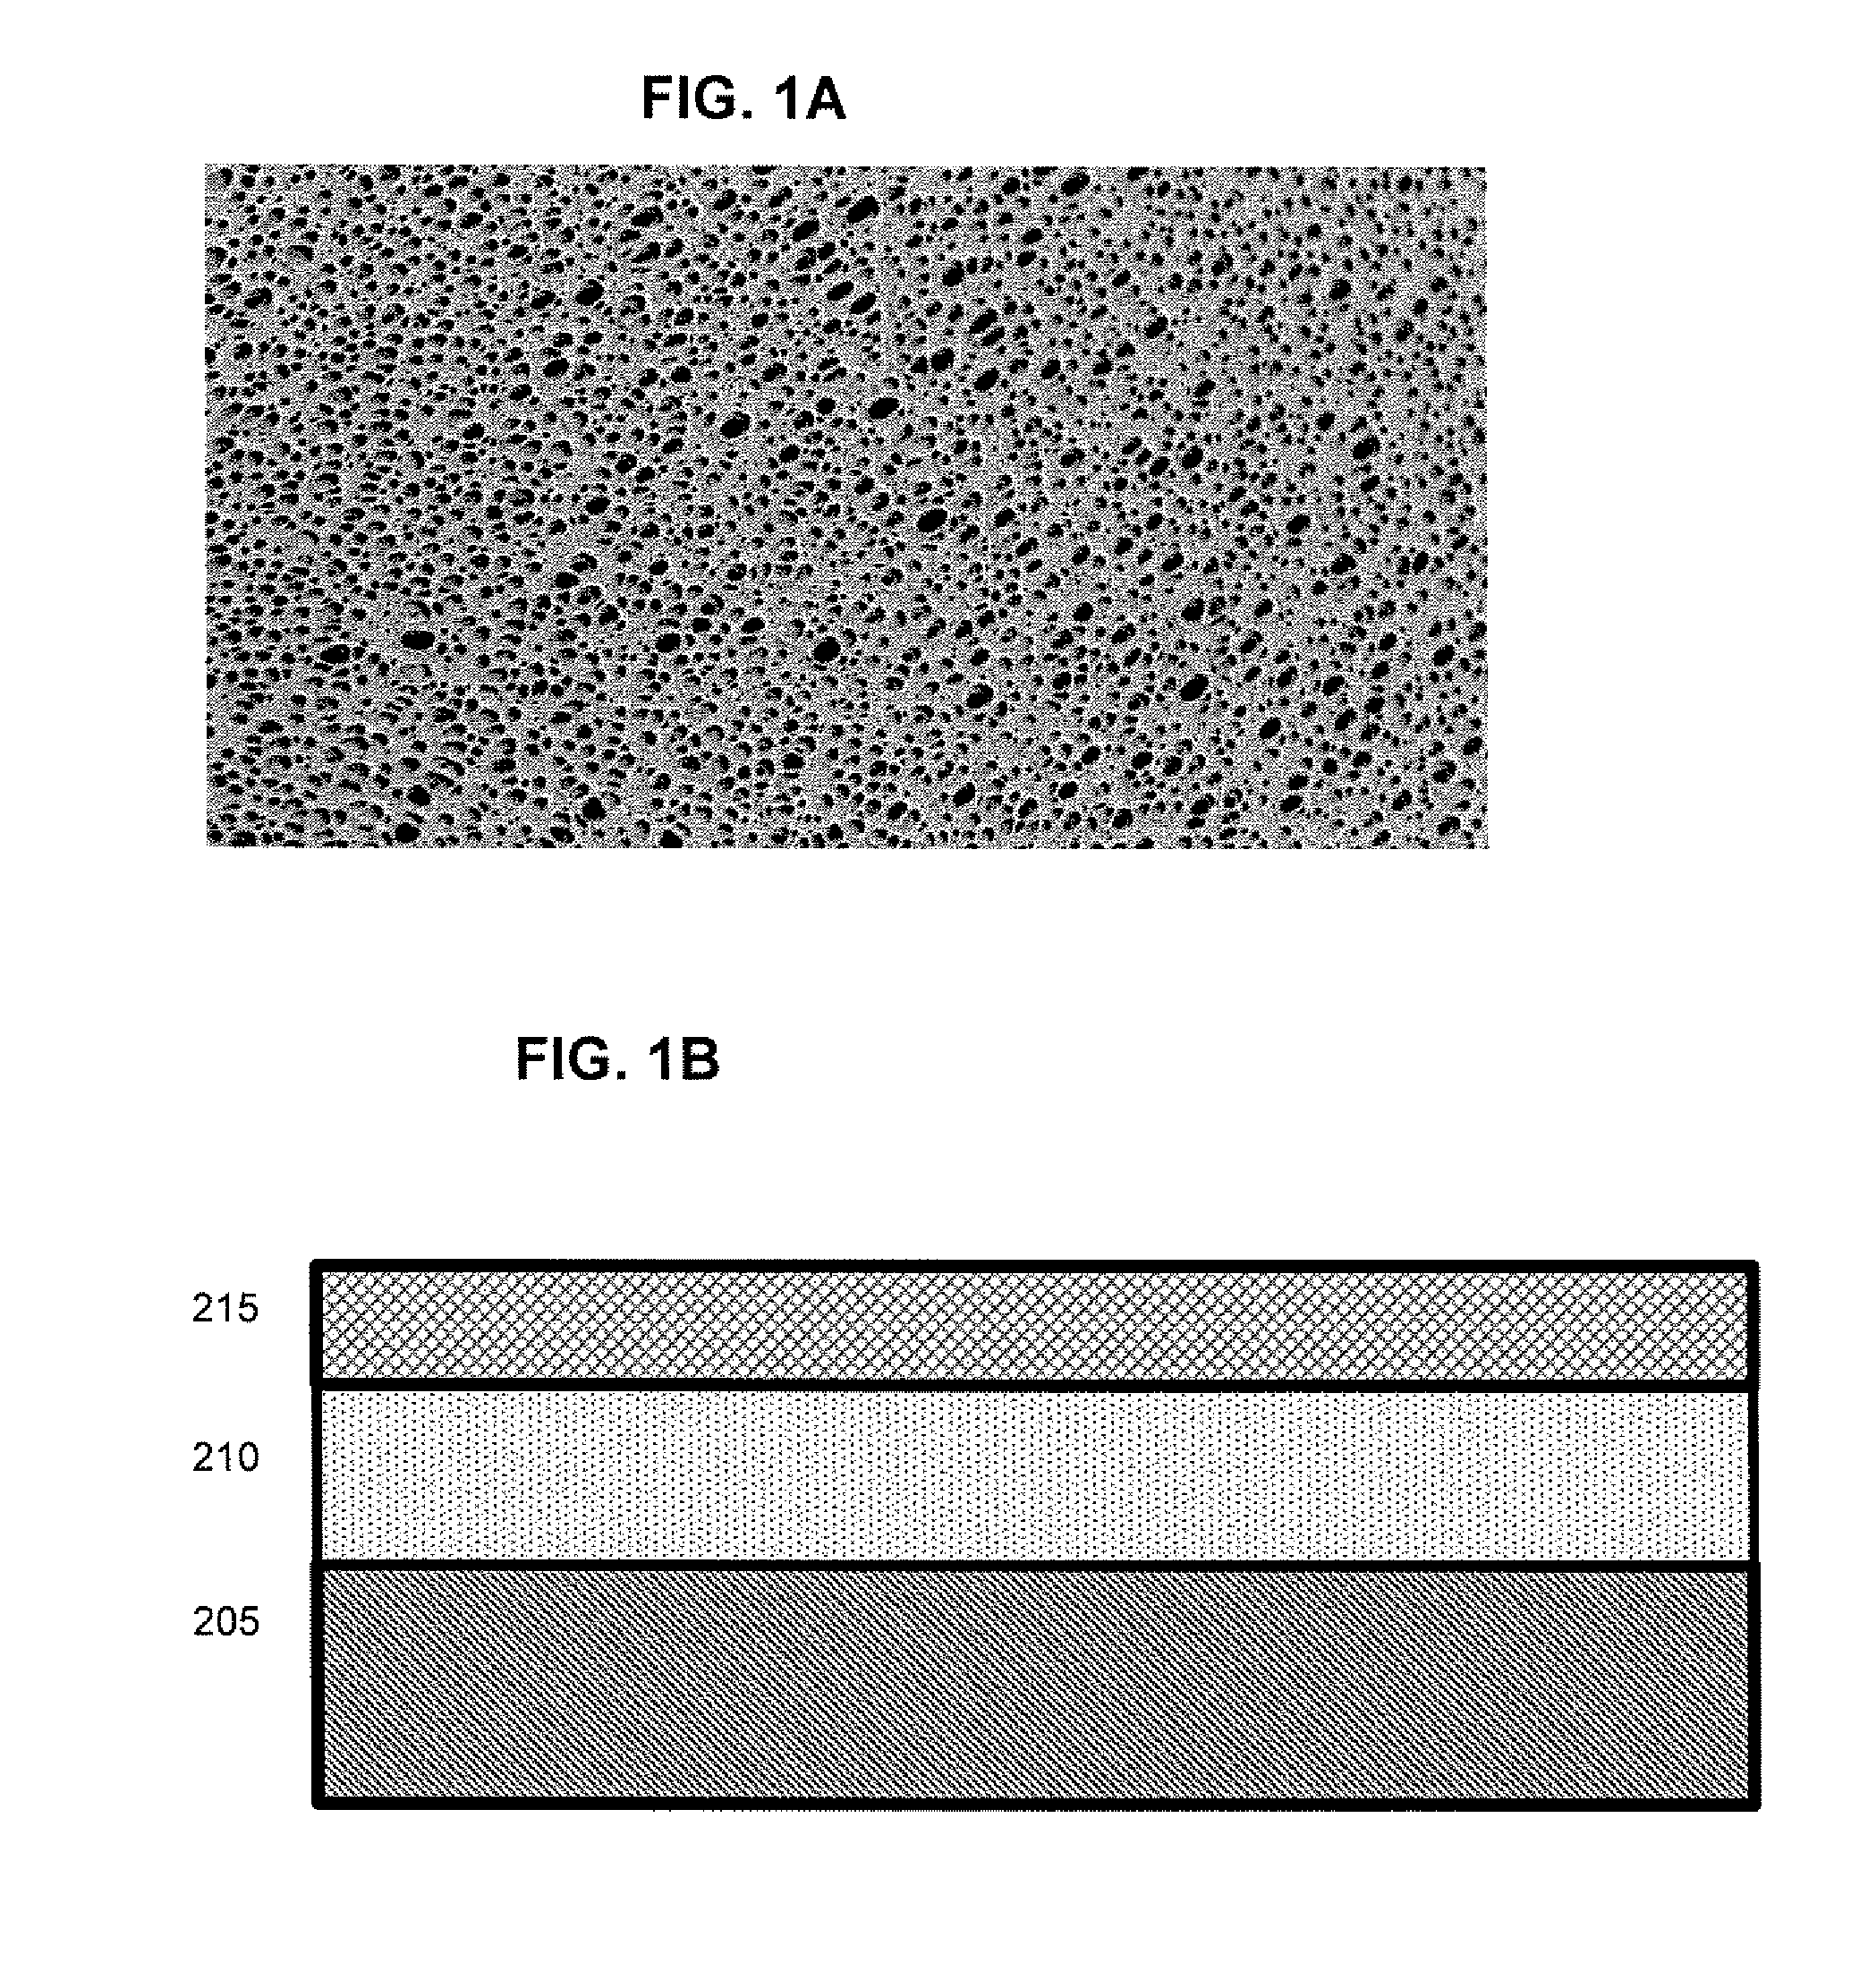 Vasodilator eluting blood storage and administration devices with a specific polyphosphazene coating and methods for their manufacture and use